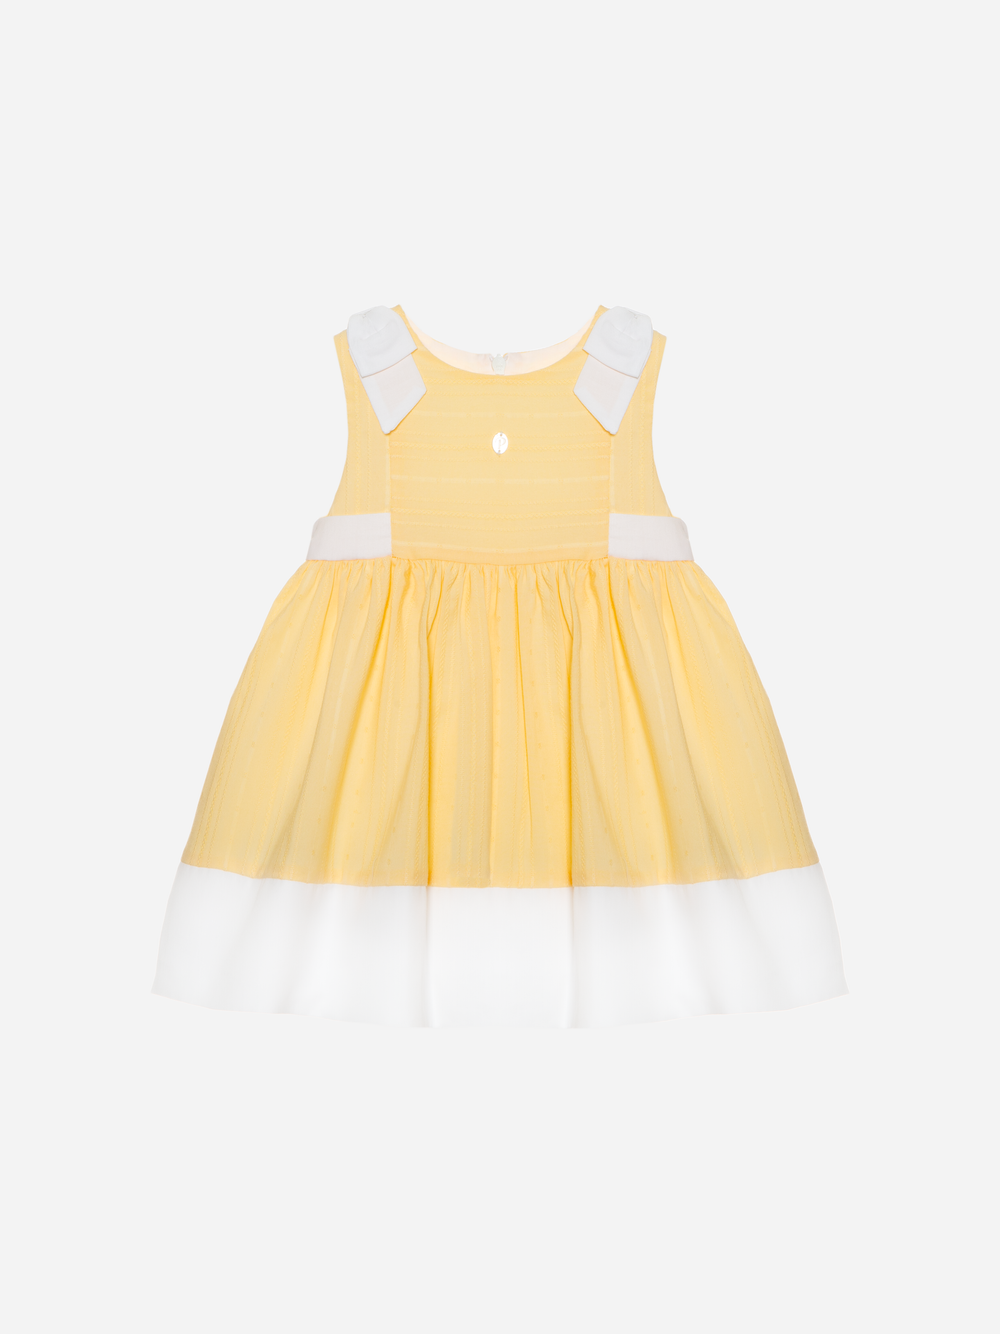 Yellow dress made in voile